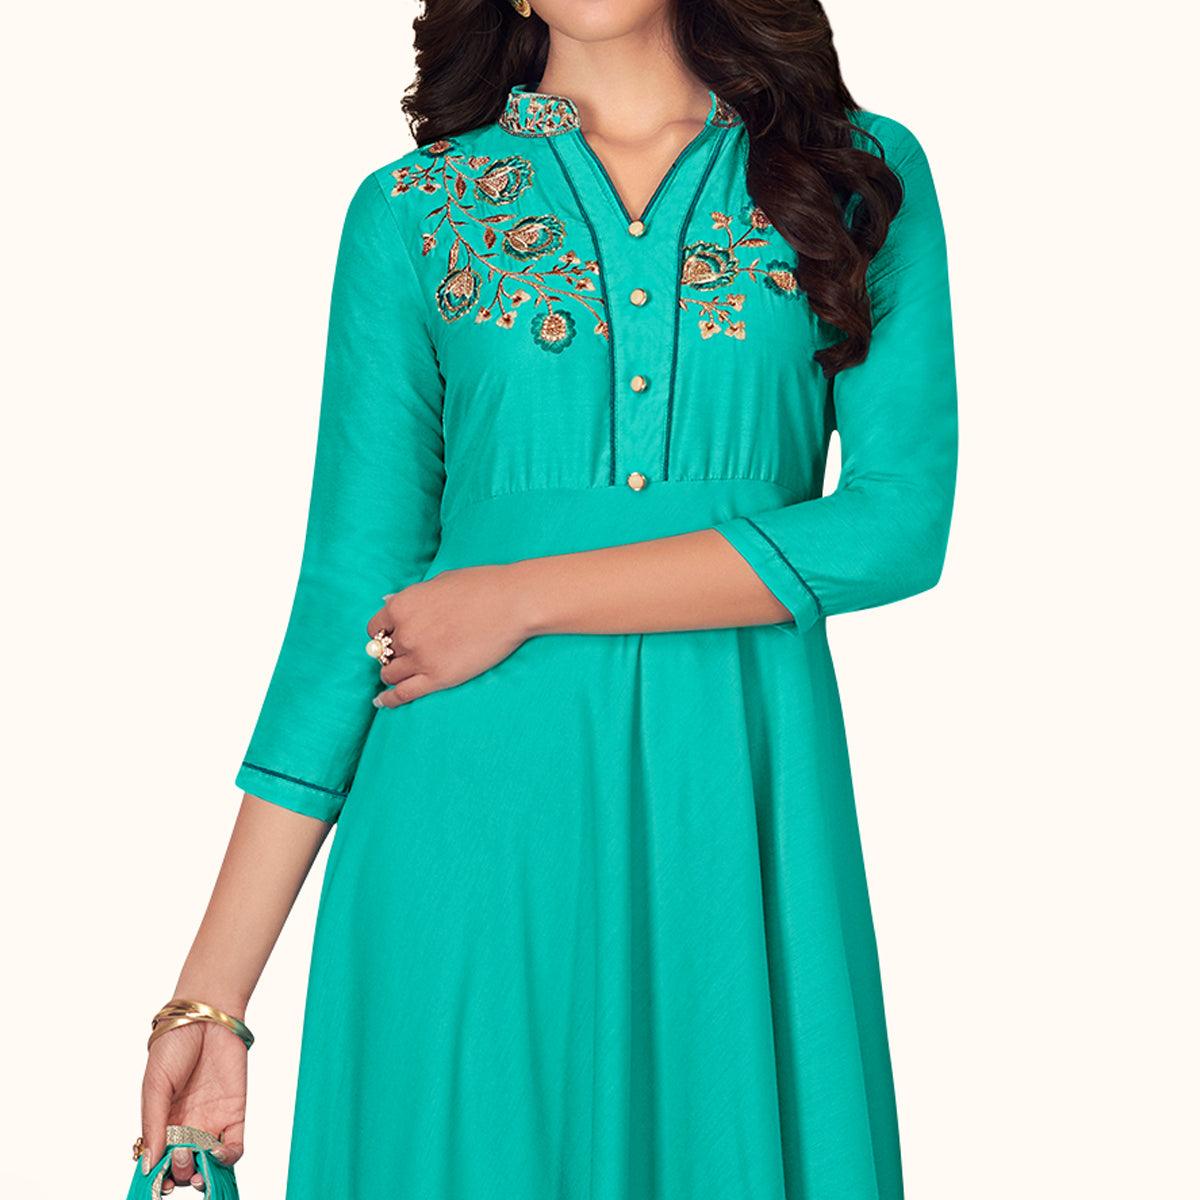 Blissful Turquoise Colored Partywear Embroidered Cotton Palazzo Suit - Peachmode